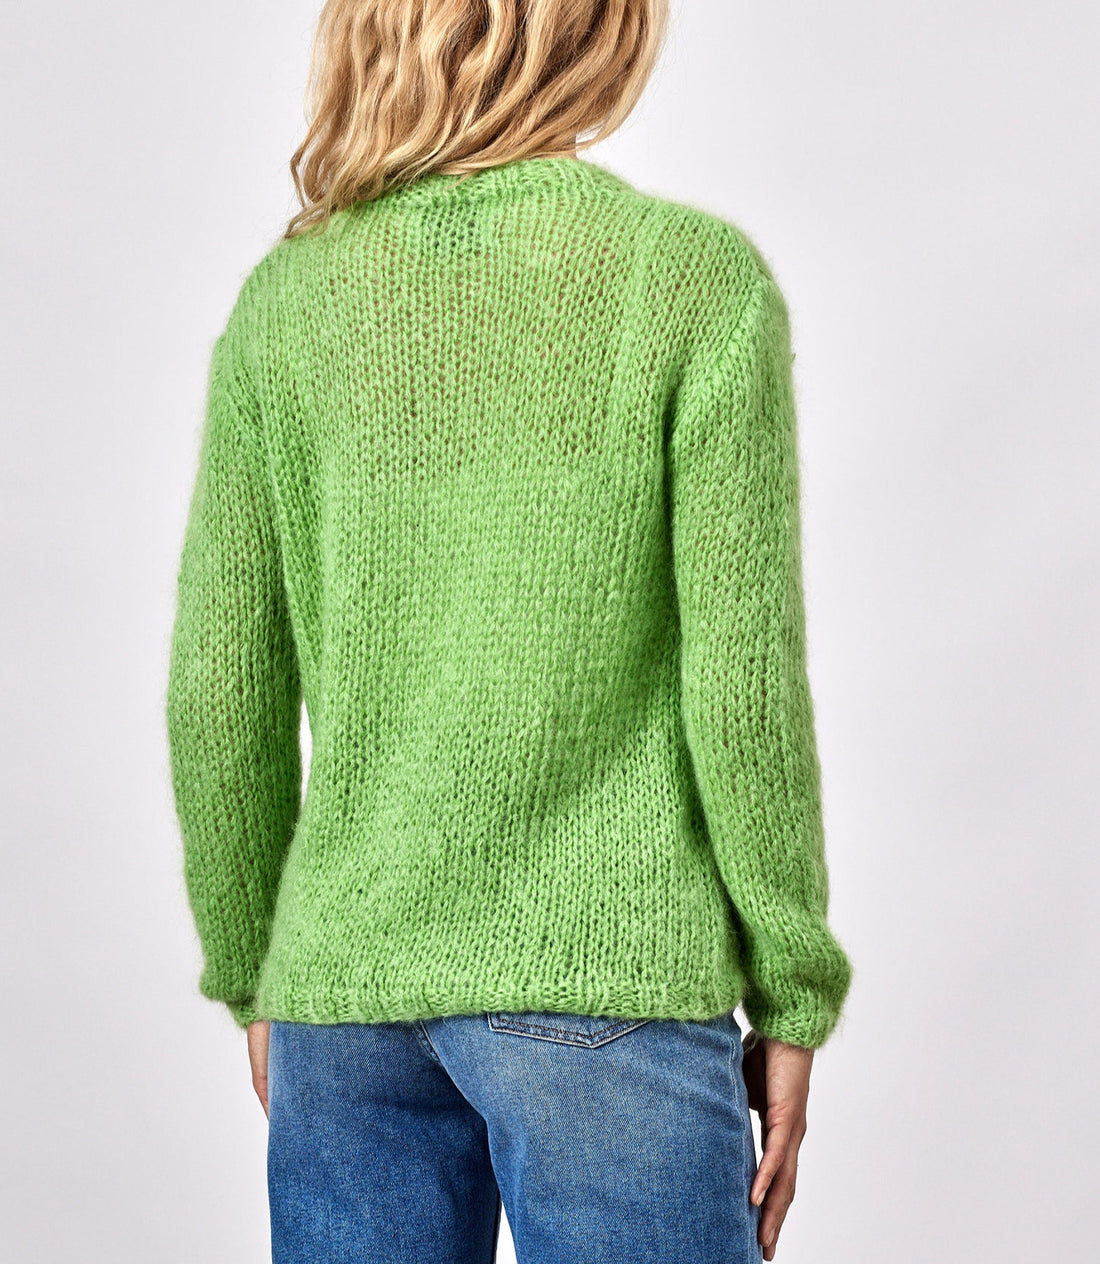 Elin knit lime green